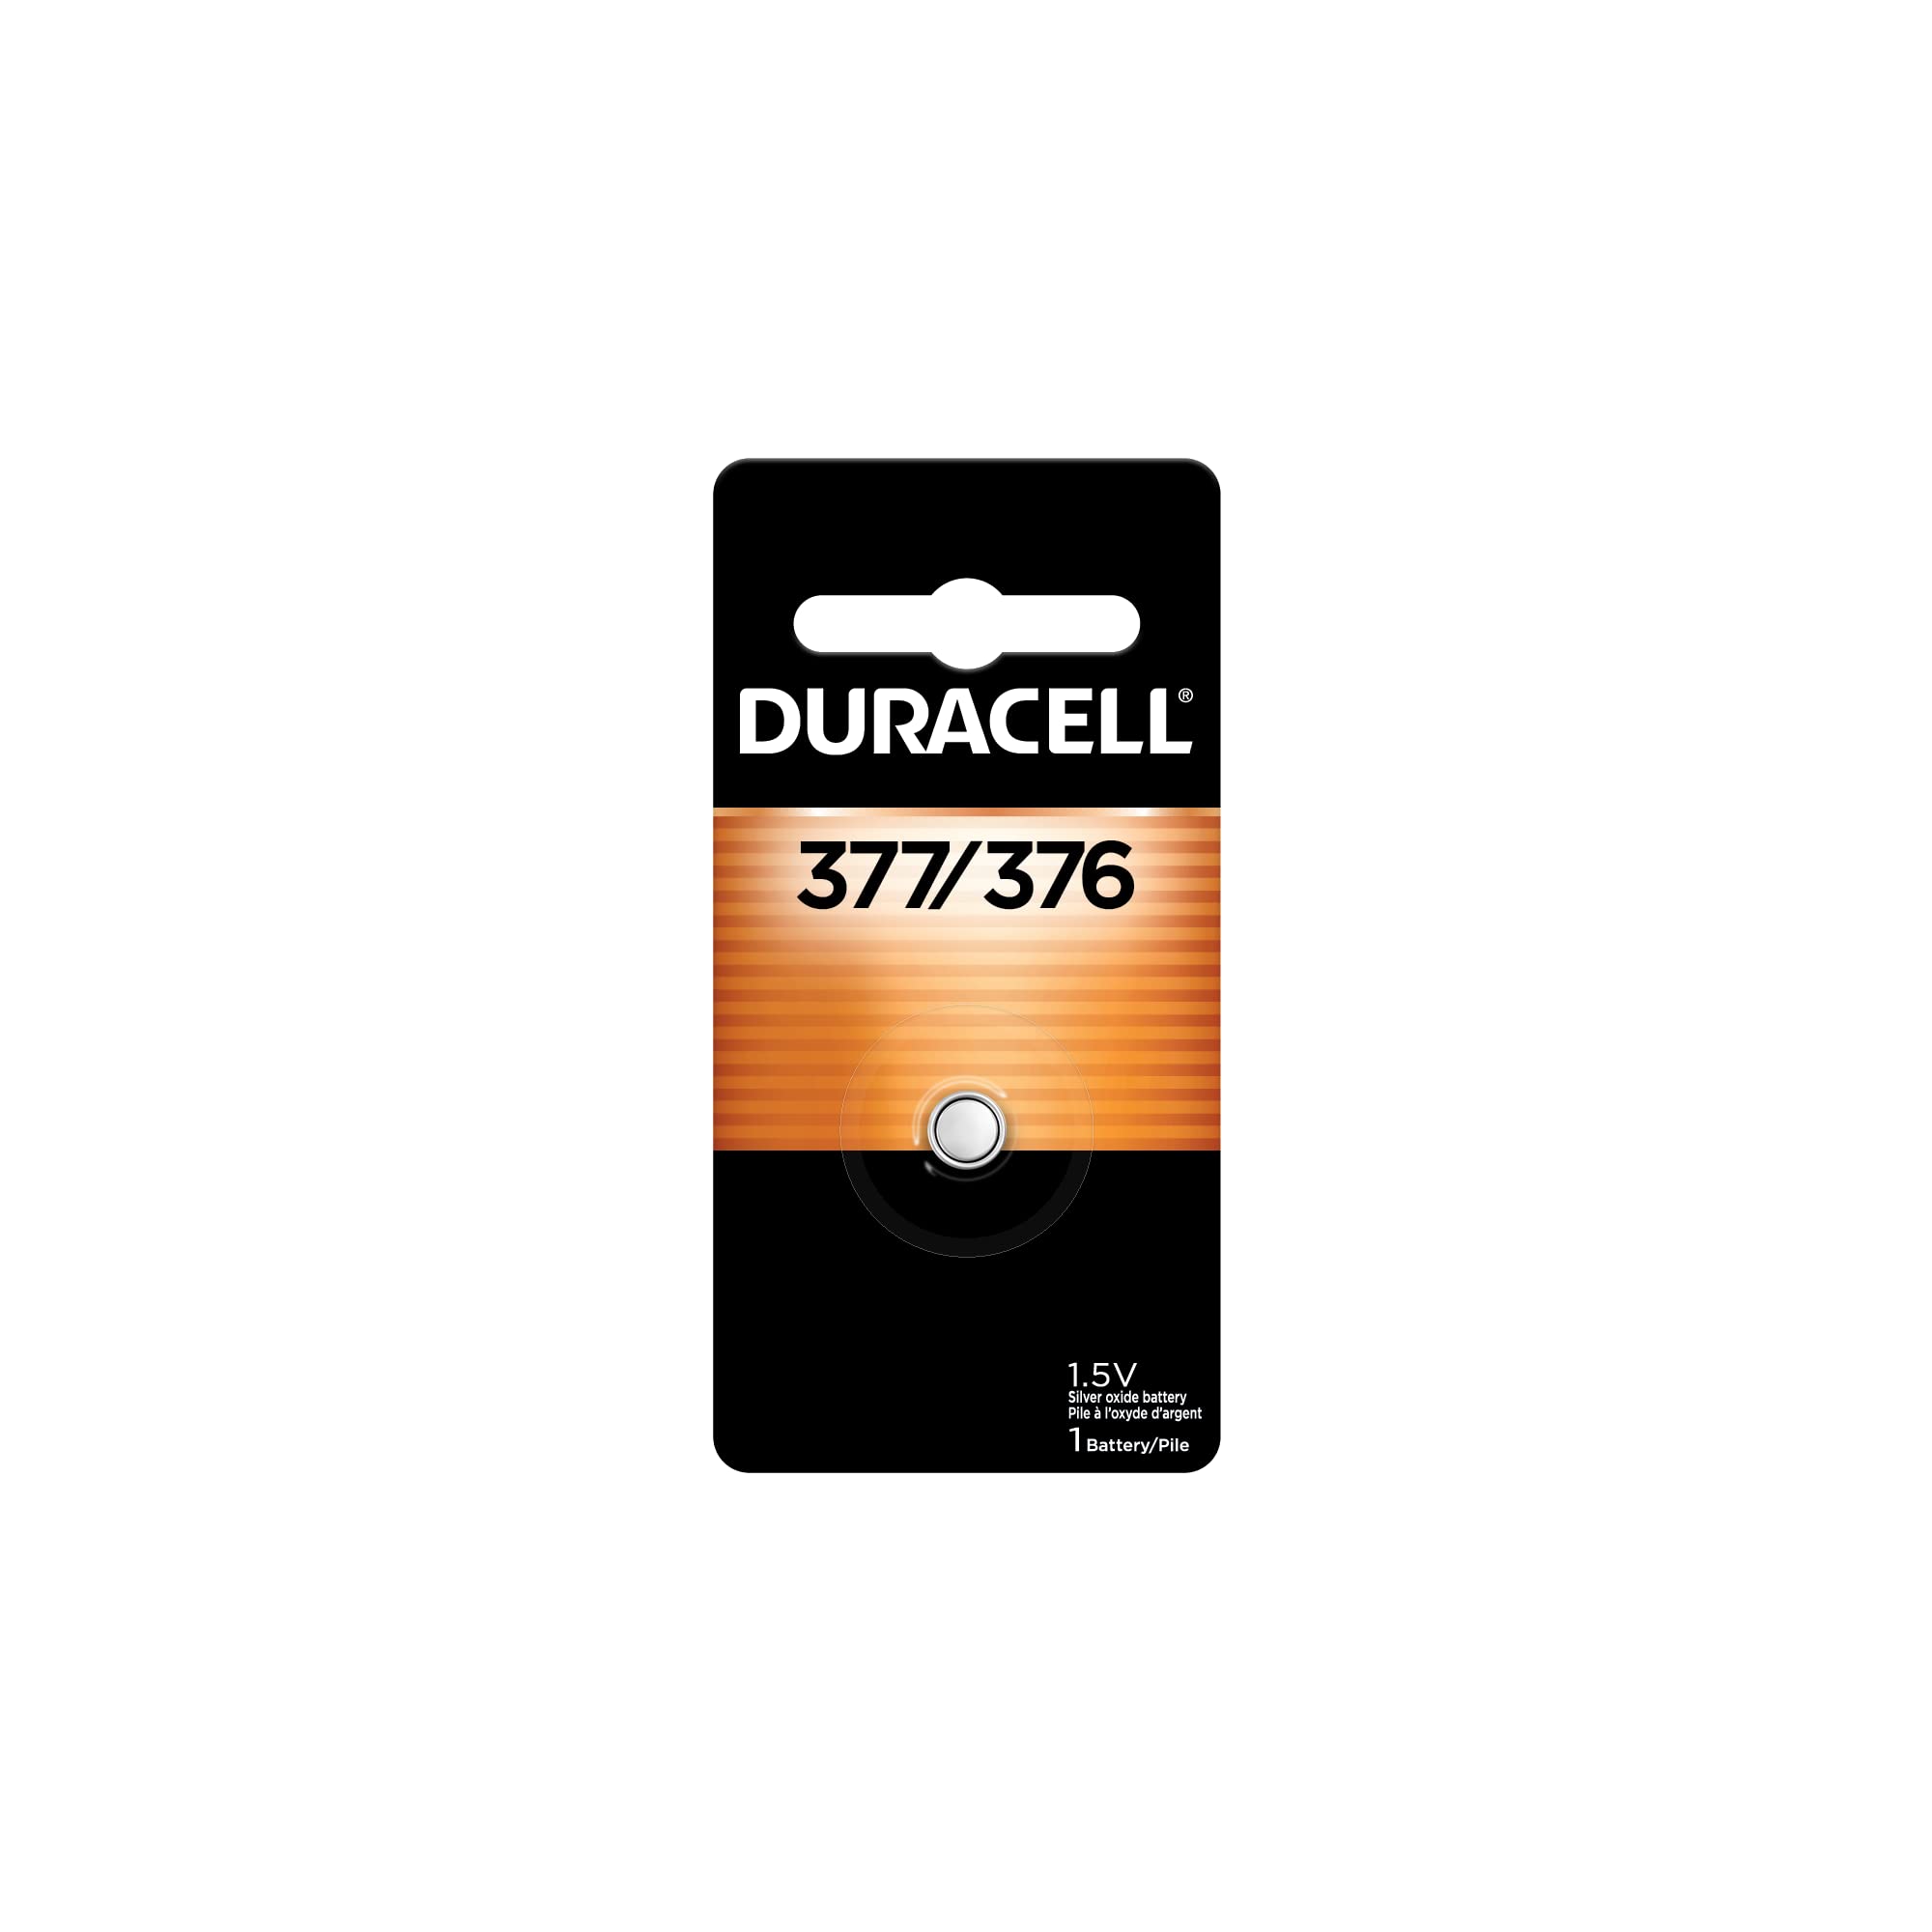 Duracell 376/377 Silver Oxide Button Battery, 1 Count Pack, 376/377 1.5 Volt Battery, Long-Lasting for Watches, Medical Devices, Calculators, and More